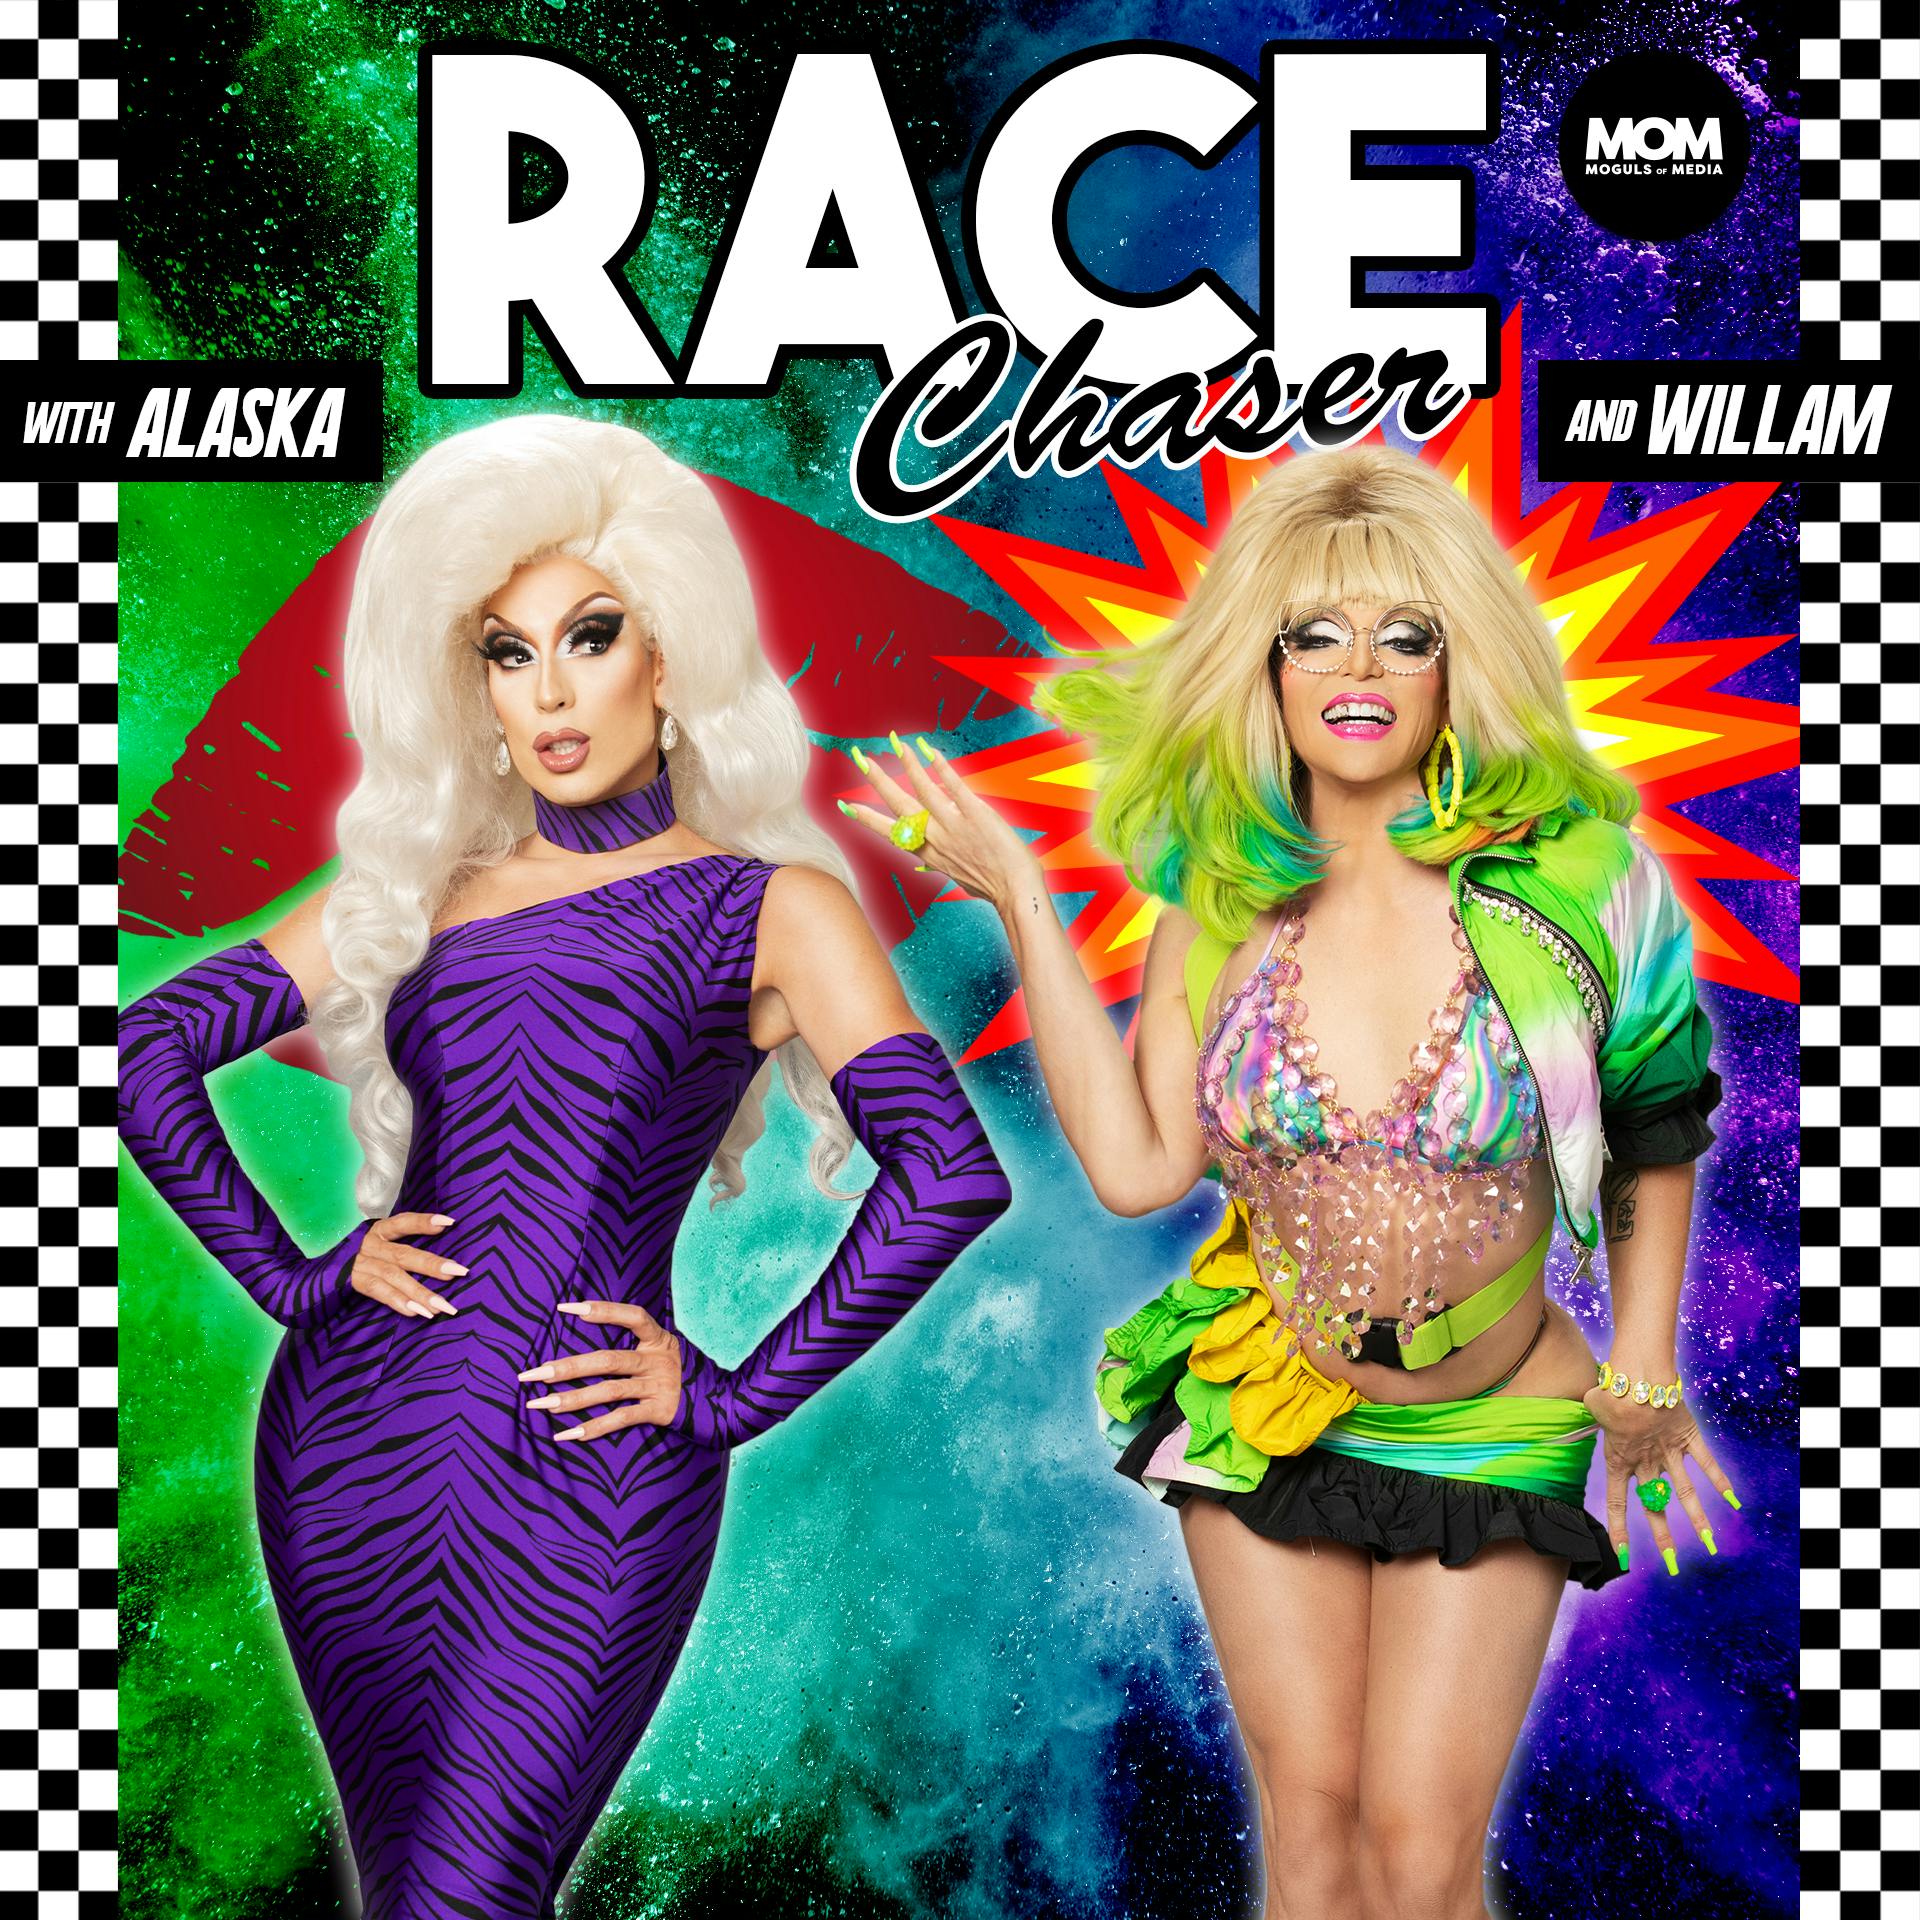 Race Chaser S9 E1 “Oh My Gaga”